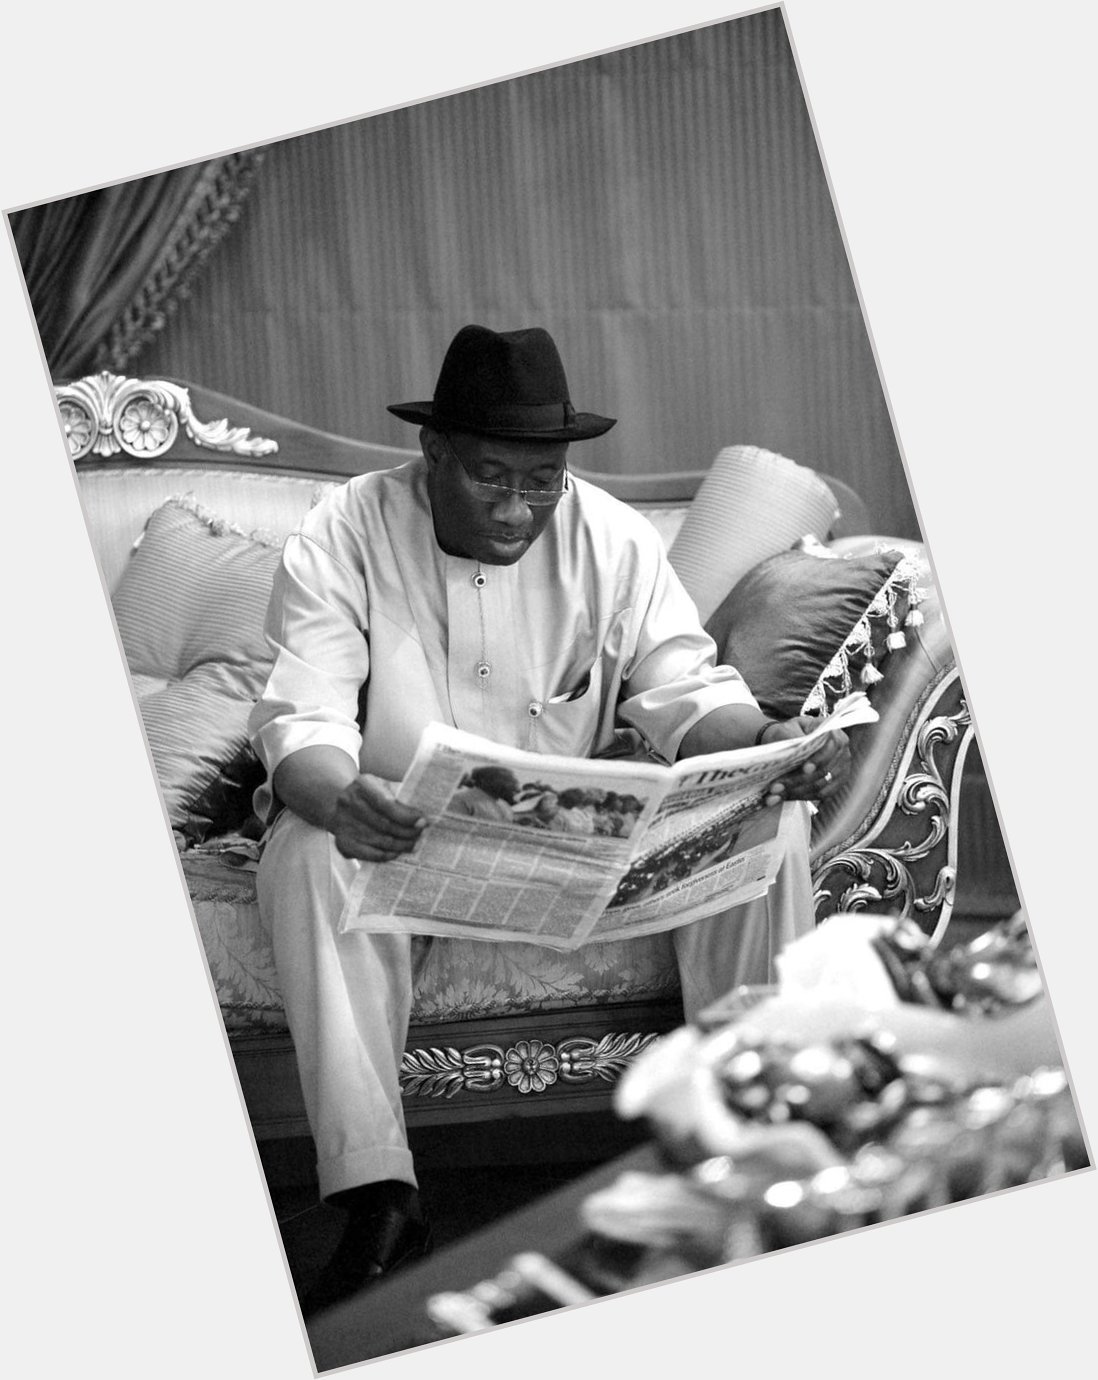 A happy 63rd birthday to Dr Goodluck Jonathan. The YOUNG man who handed power over to a 77 year old man. 